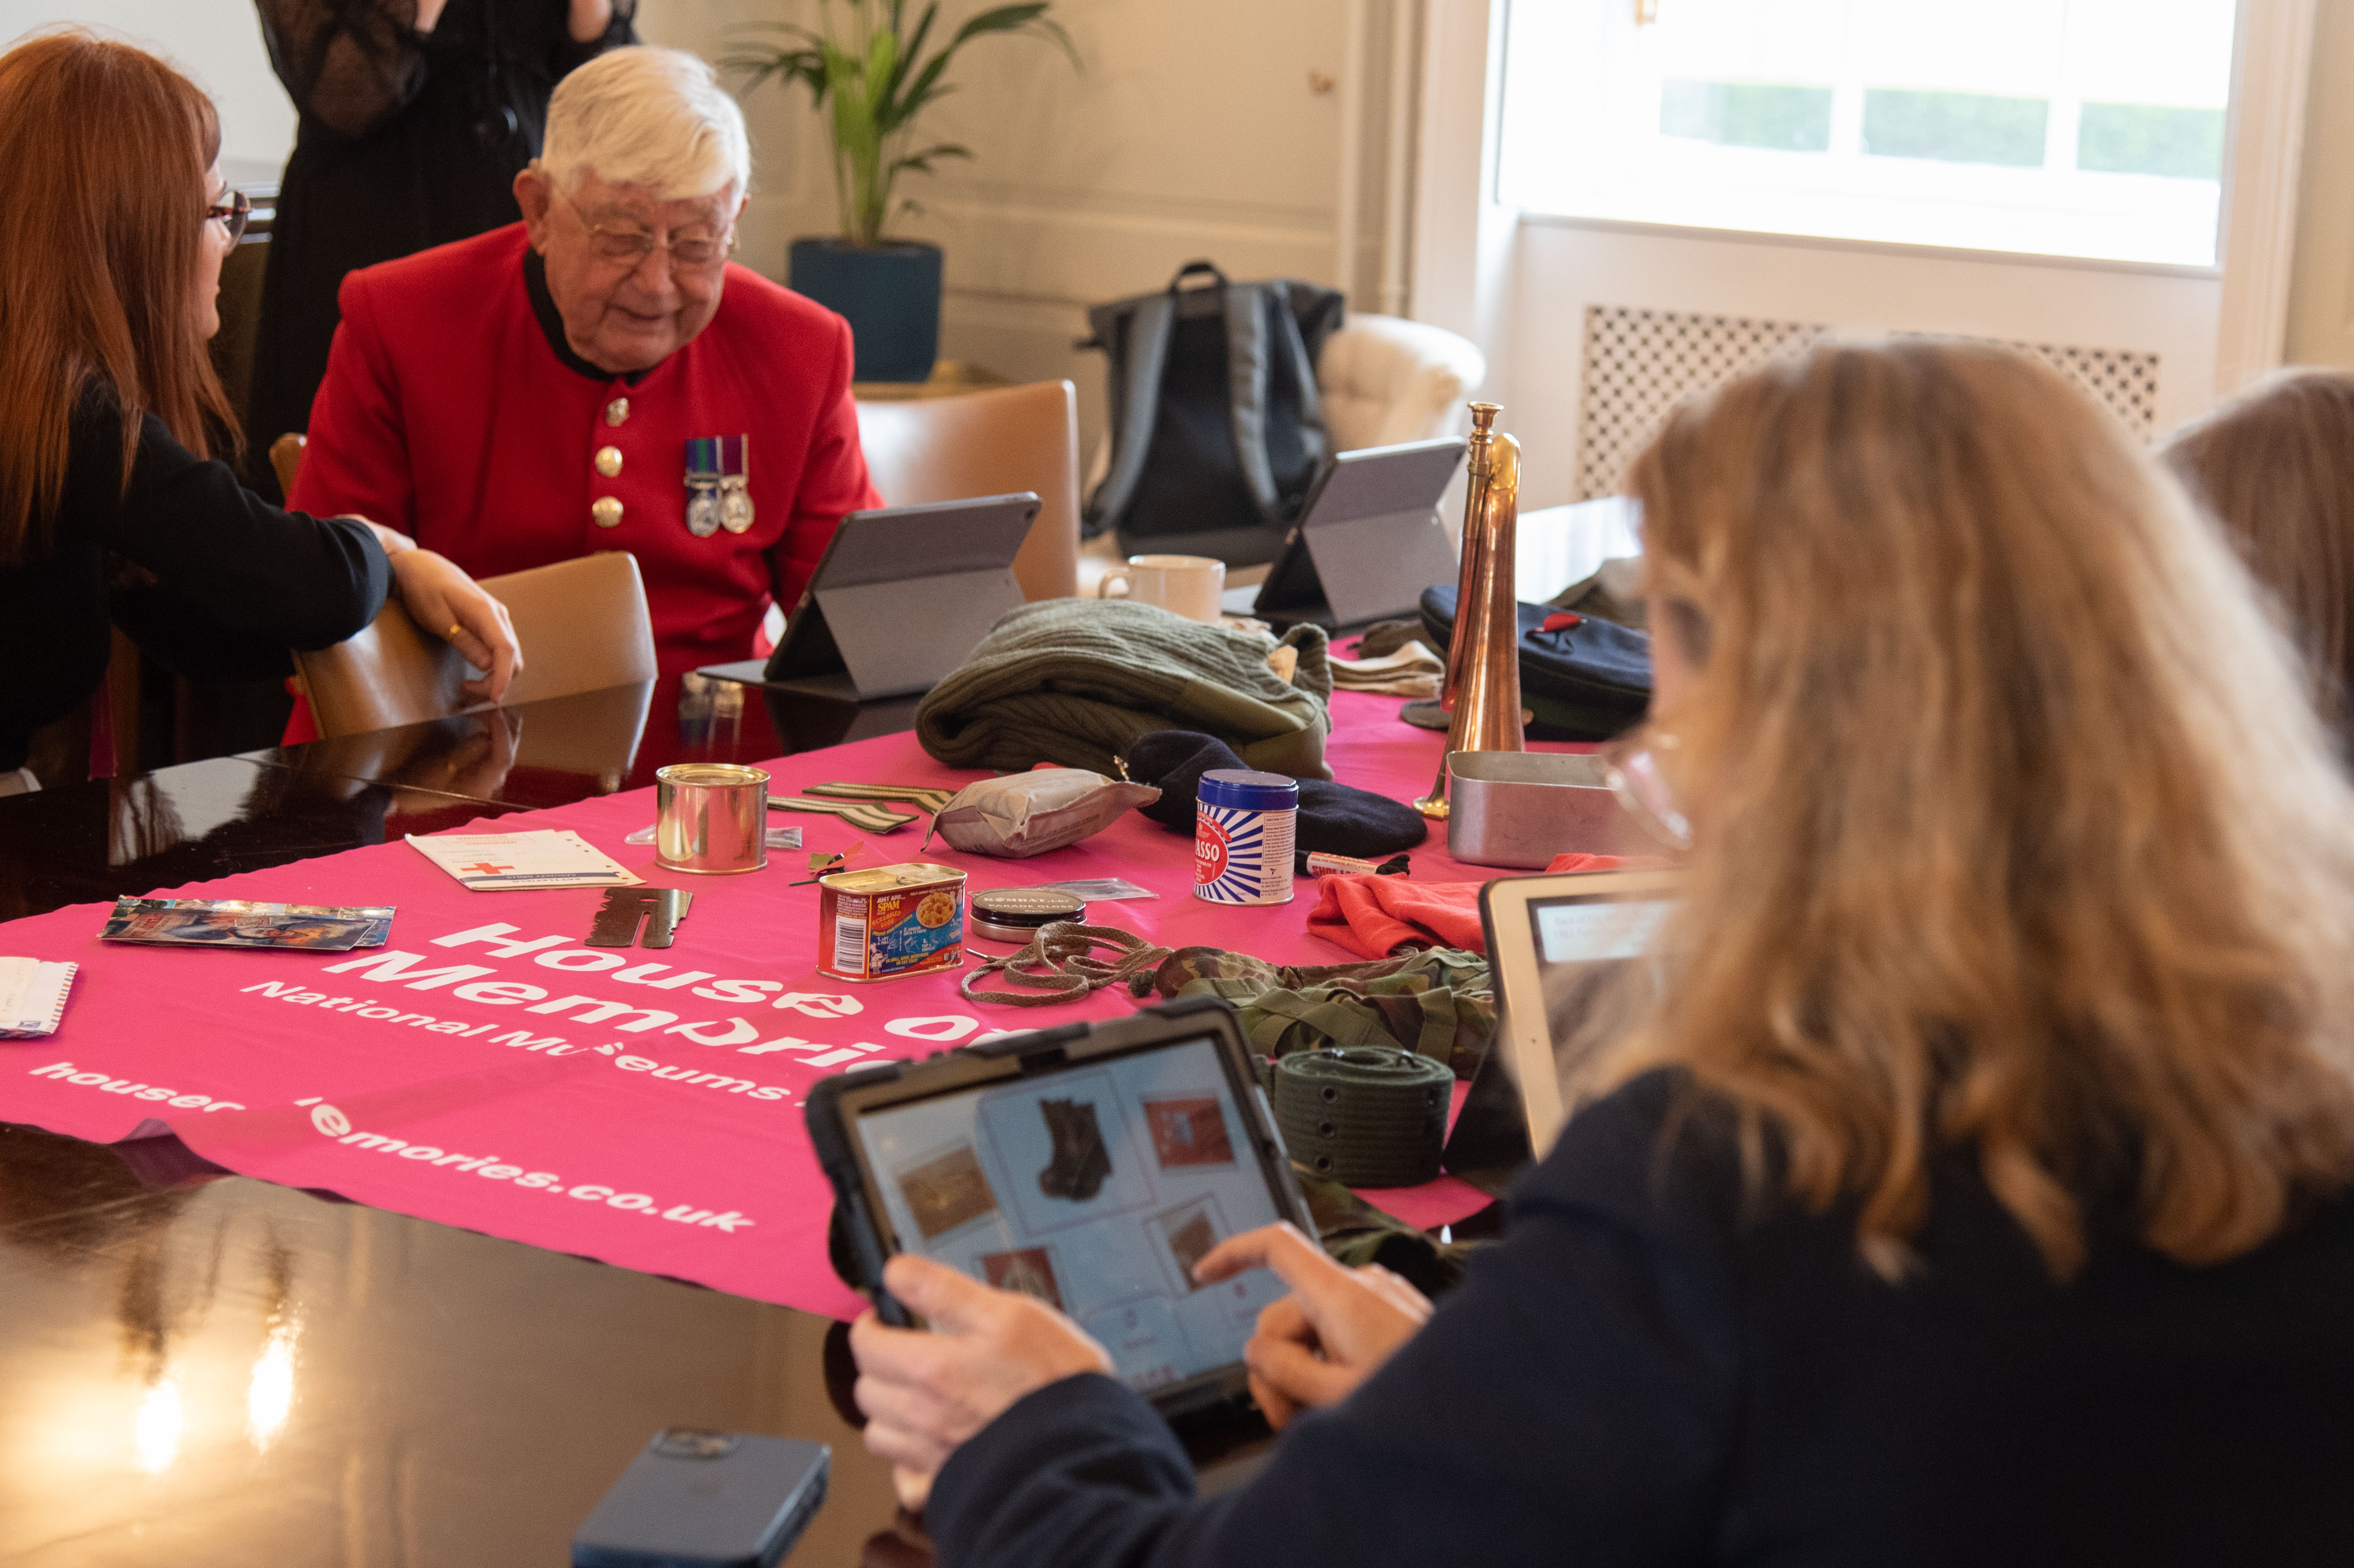 People sat round a table looking at iPads. A pink cloth is in the middle of the table with the House of Memories logo on and objects from the My House of Memories app